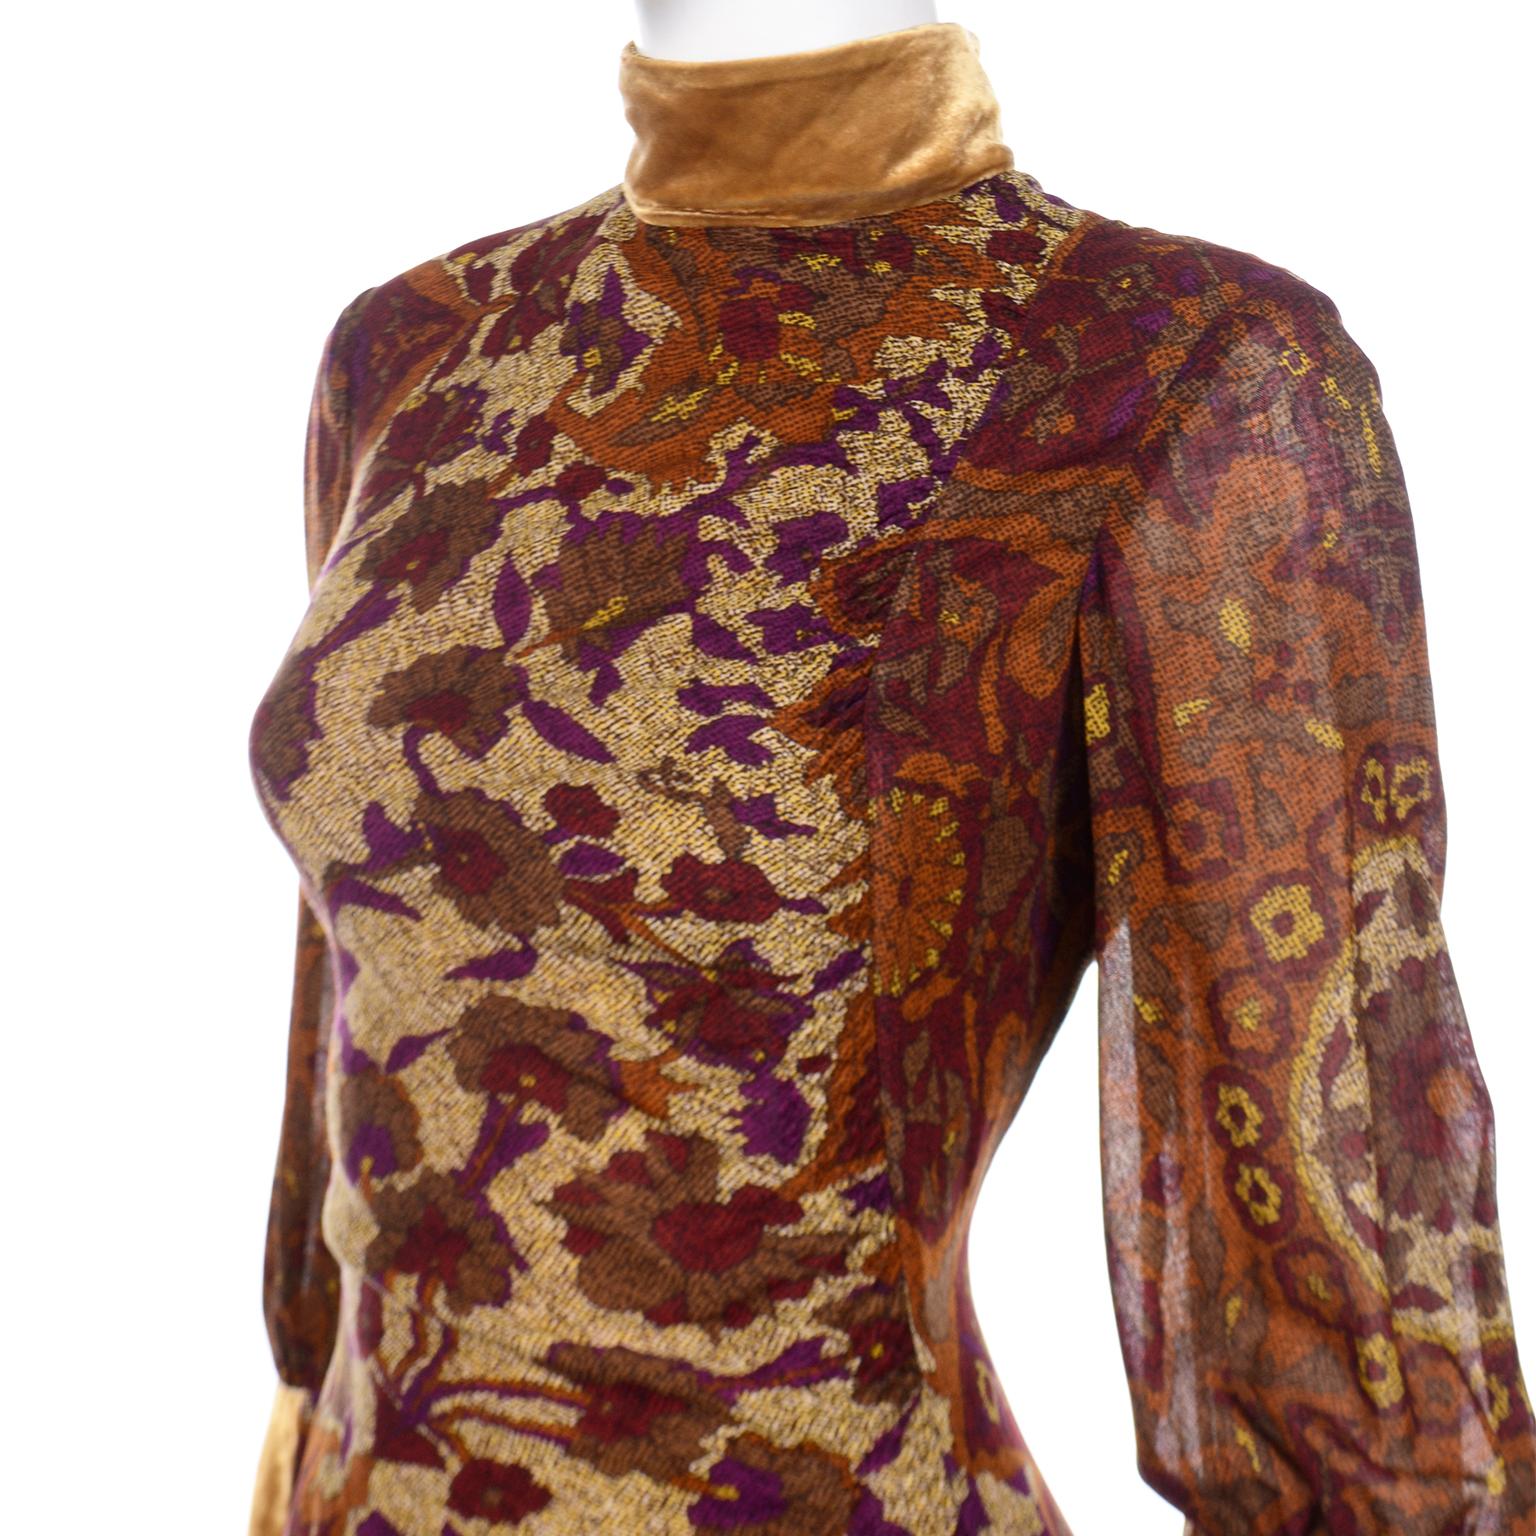 Kenzo Vintage Lush Plum Brown and Gold Floral Print Dress w Gold Velvet Trim For Sale 1